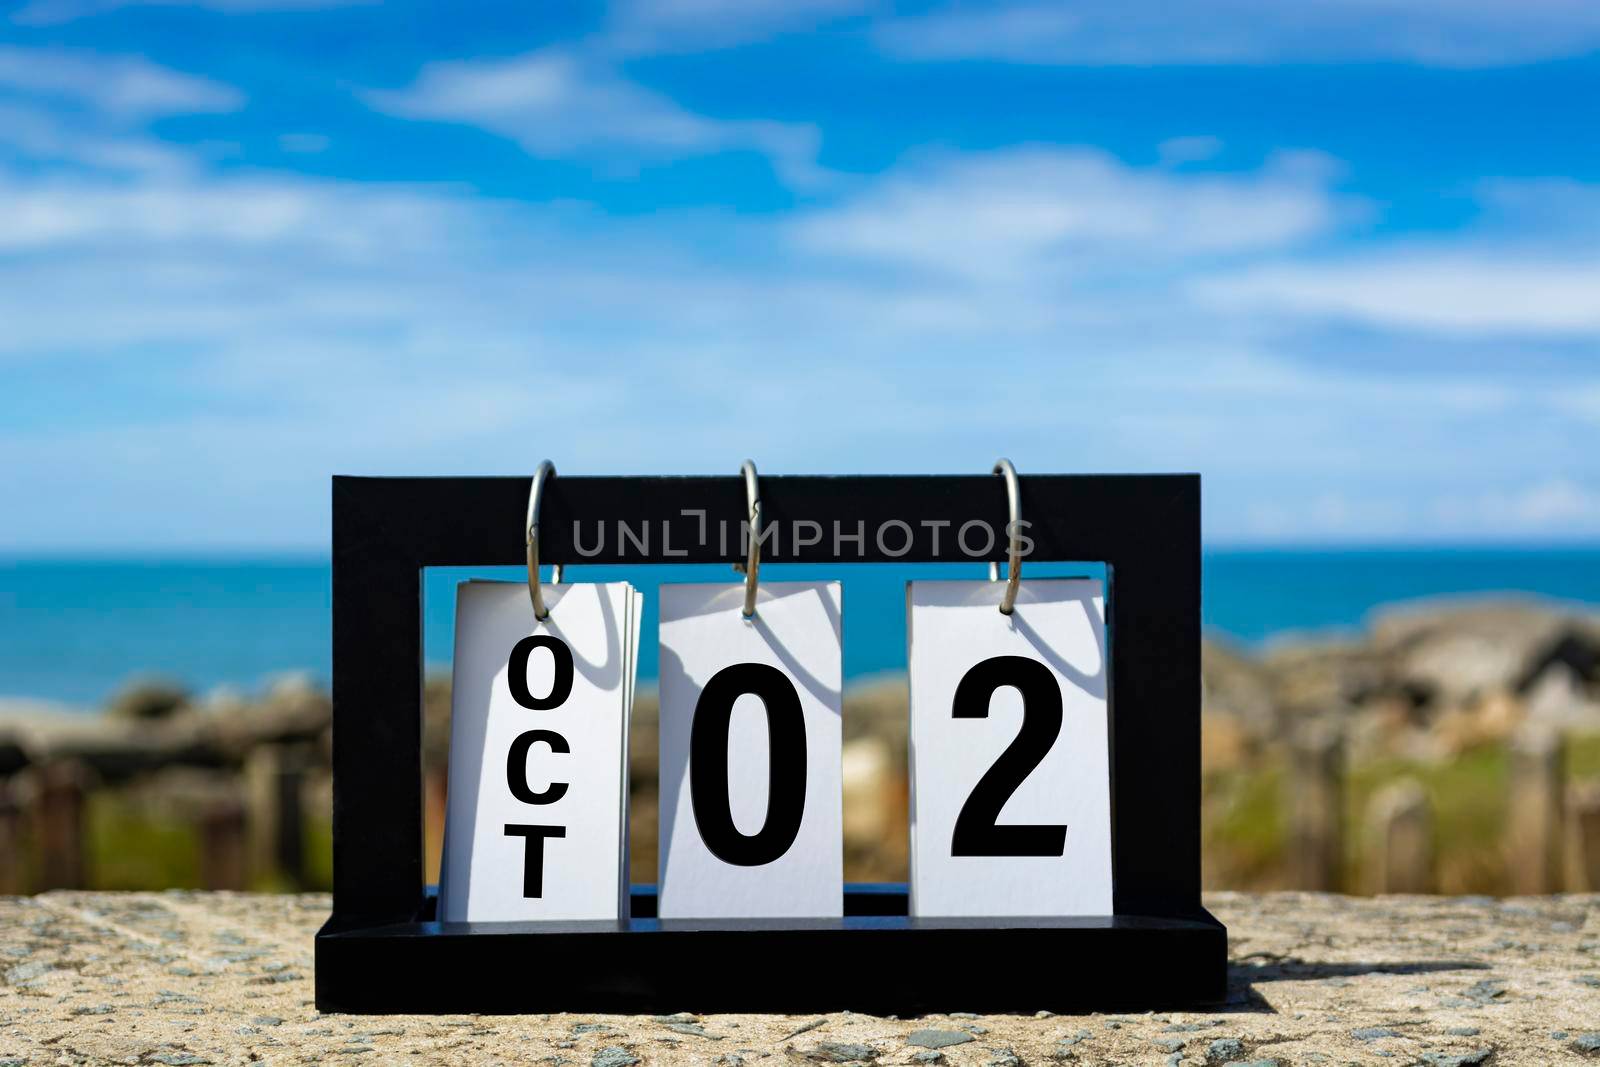 Oct 02 calendar date text on wooden frame with blurred background of ocean. Calendar date concept.